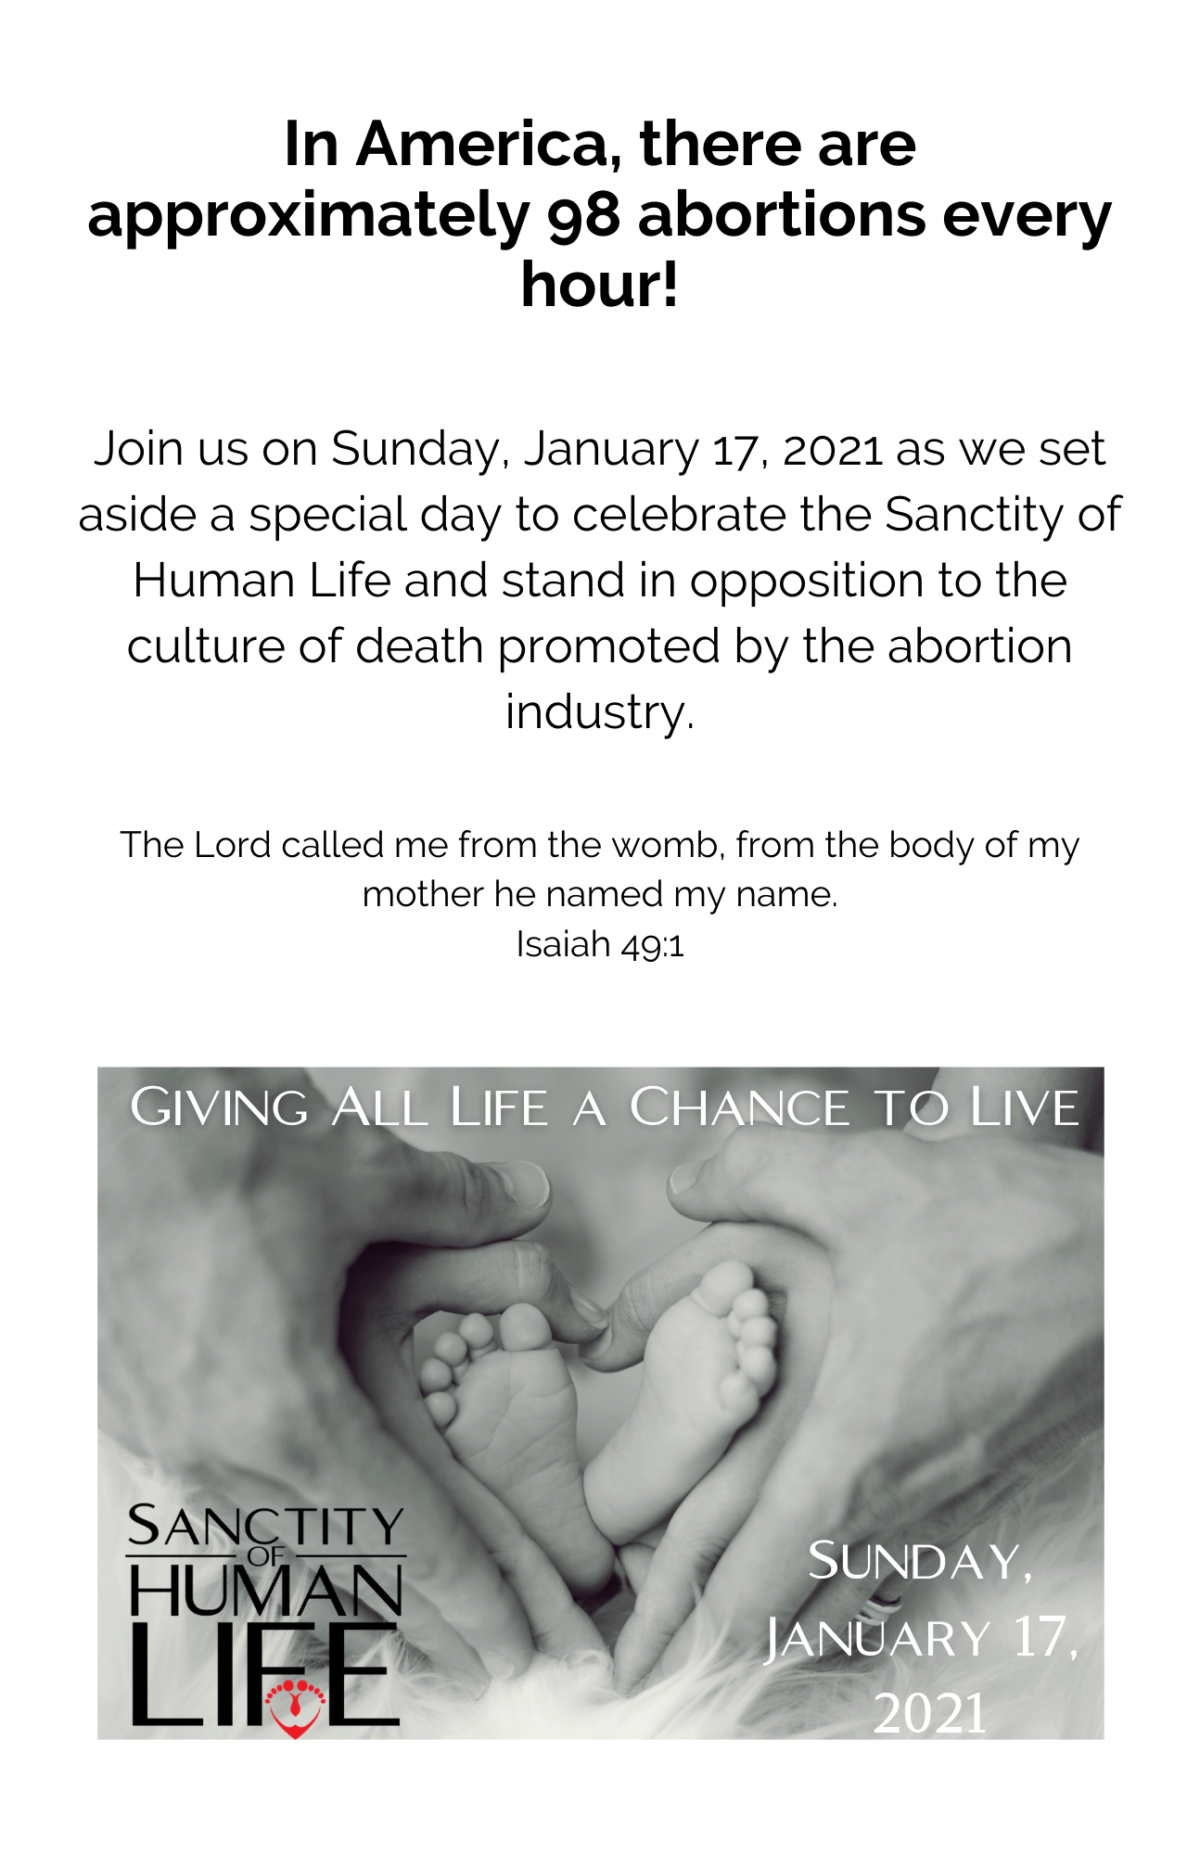 Package 3 - Sanctity of Life Sunday